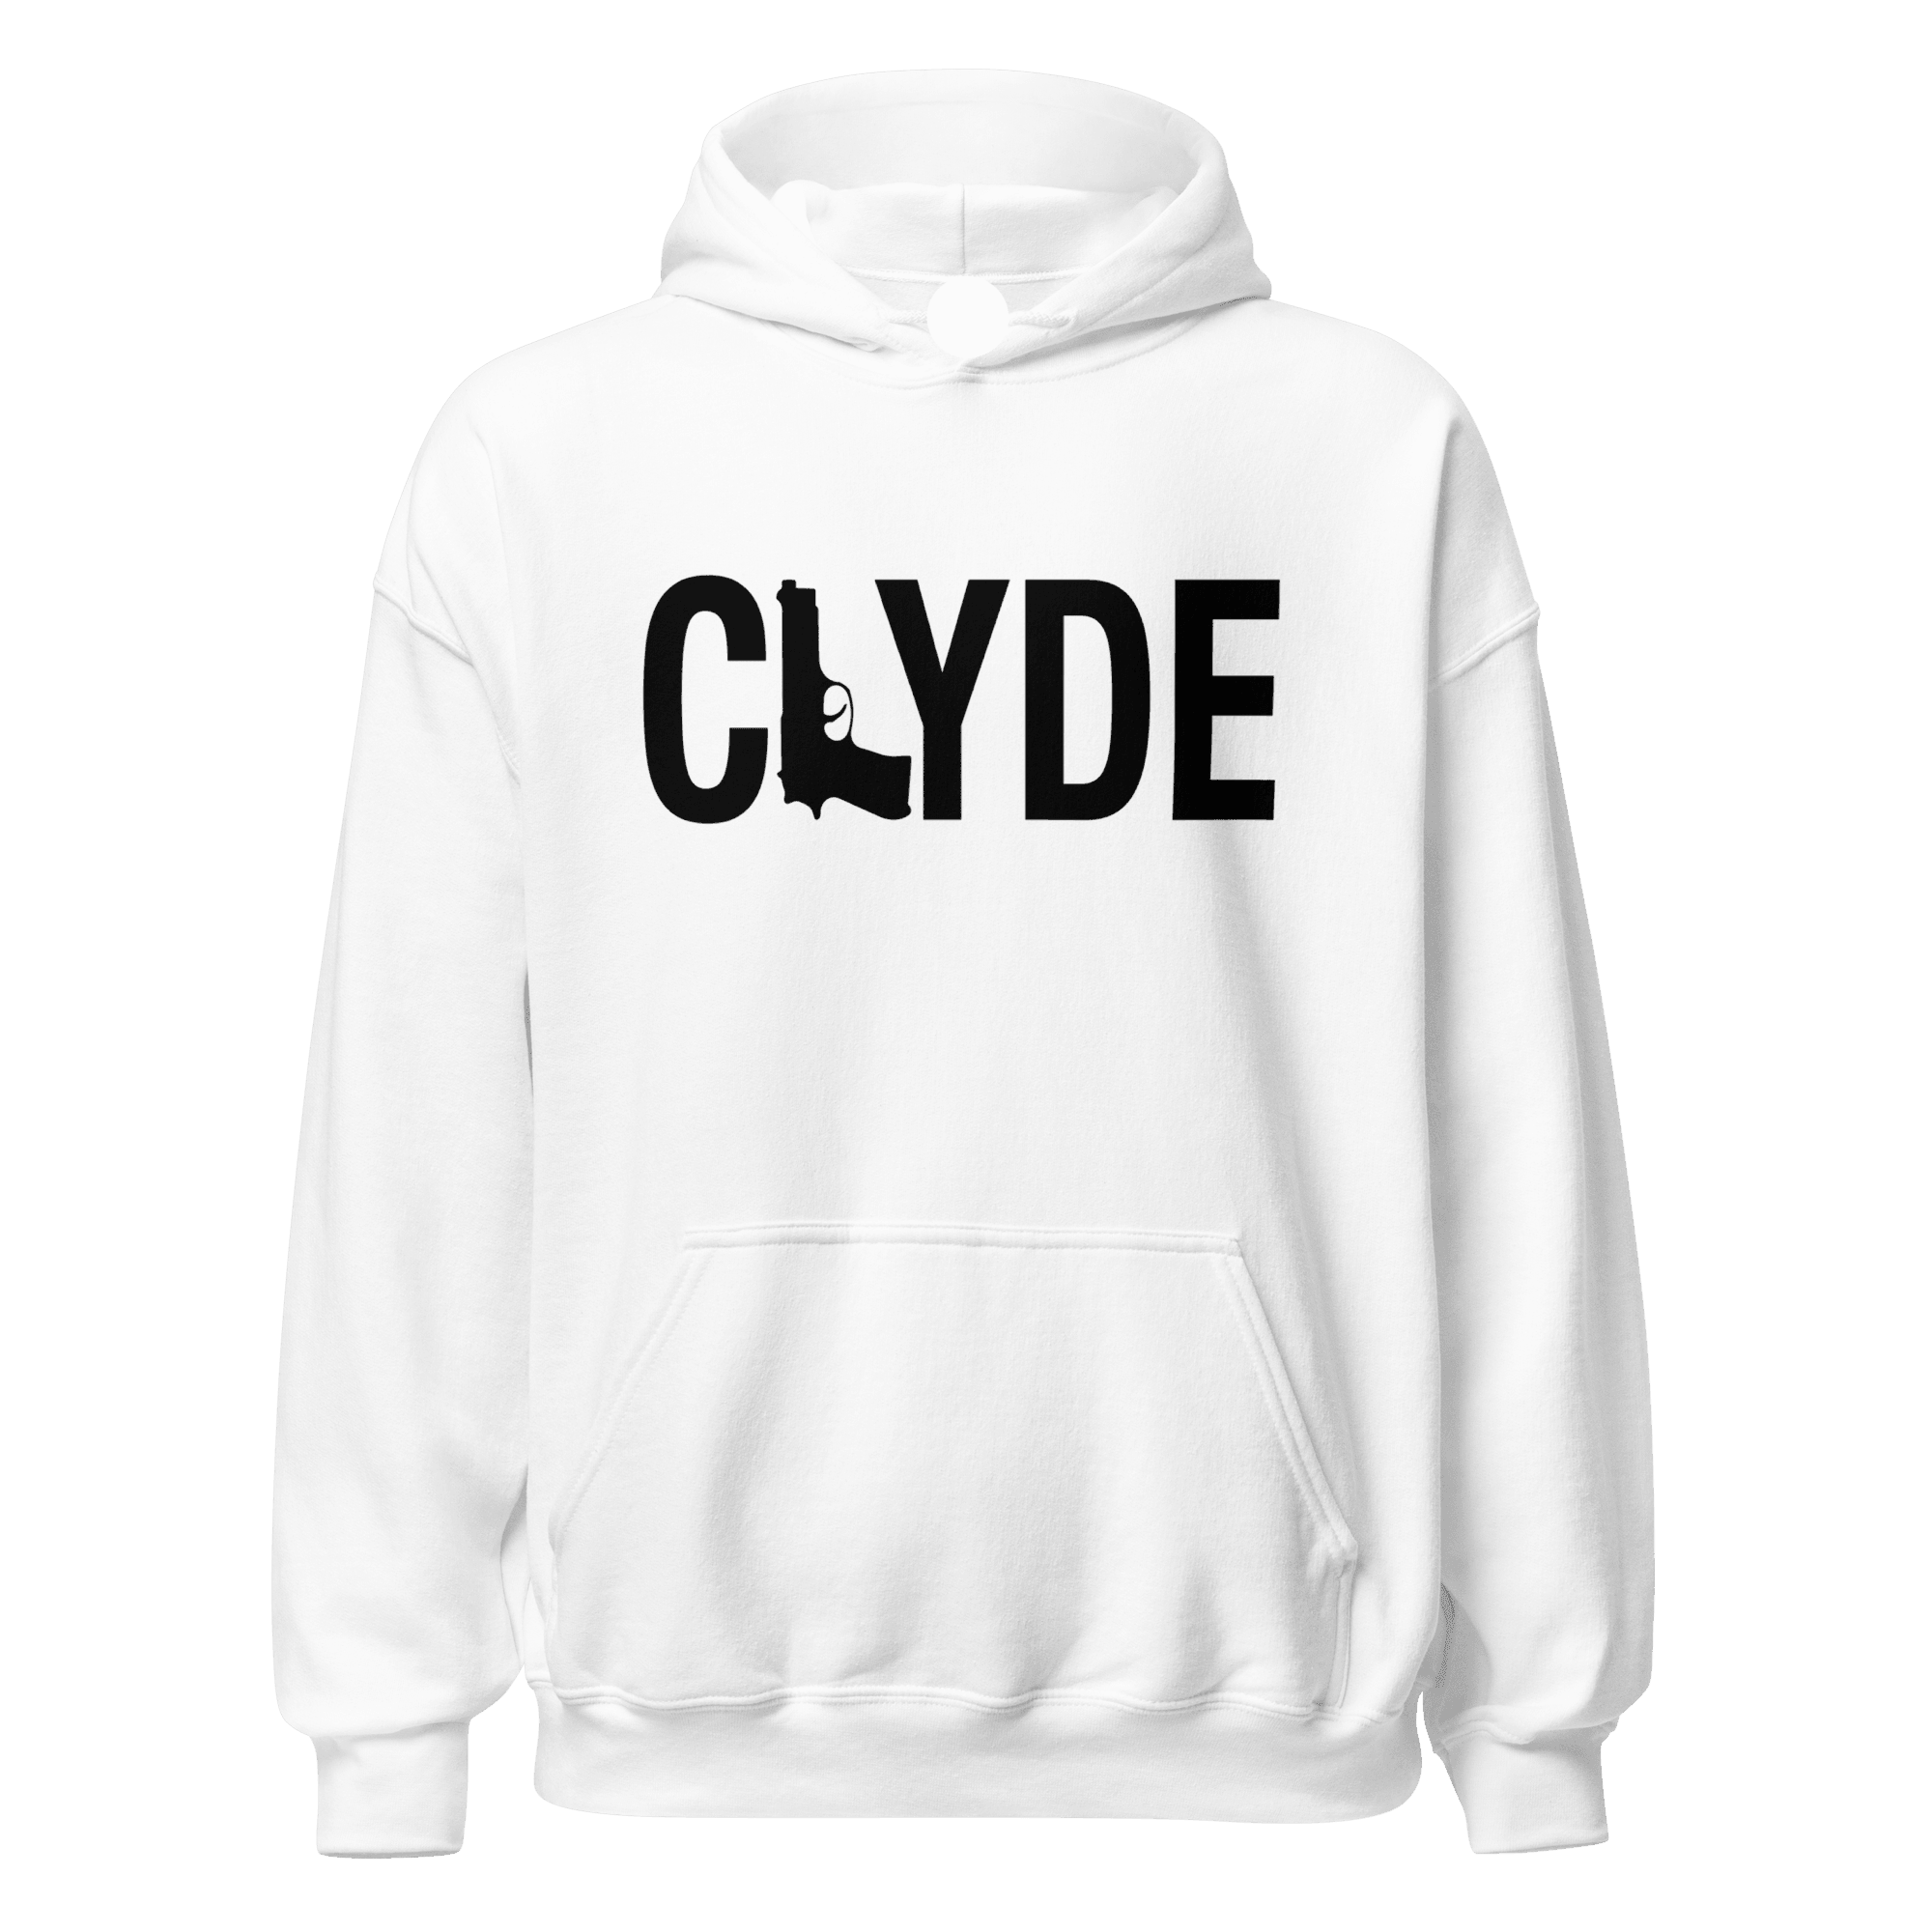 Ultra Soft Blended Cotton Bonnie and Clyde Couples Hoodie Set - TopKoalaTee